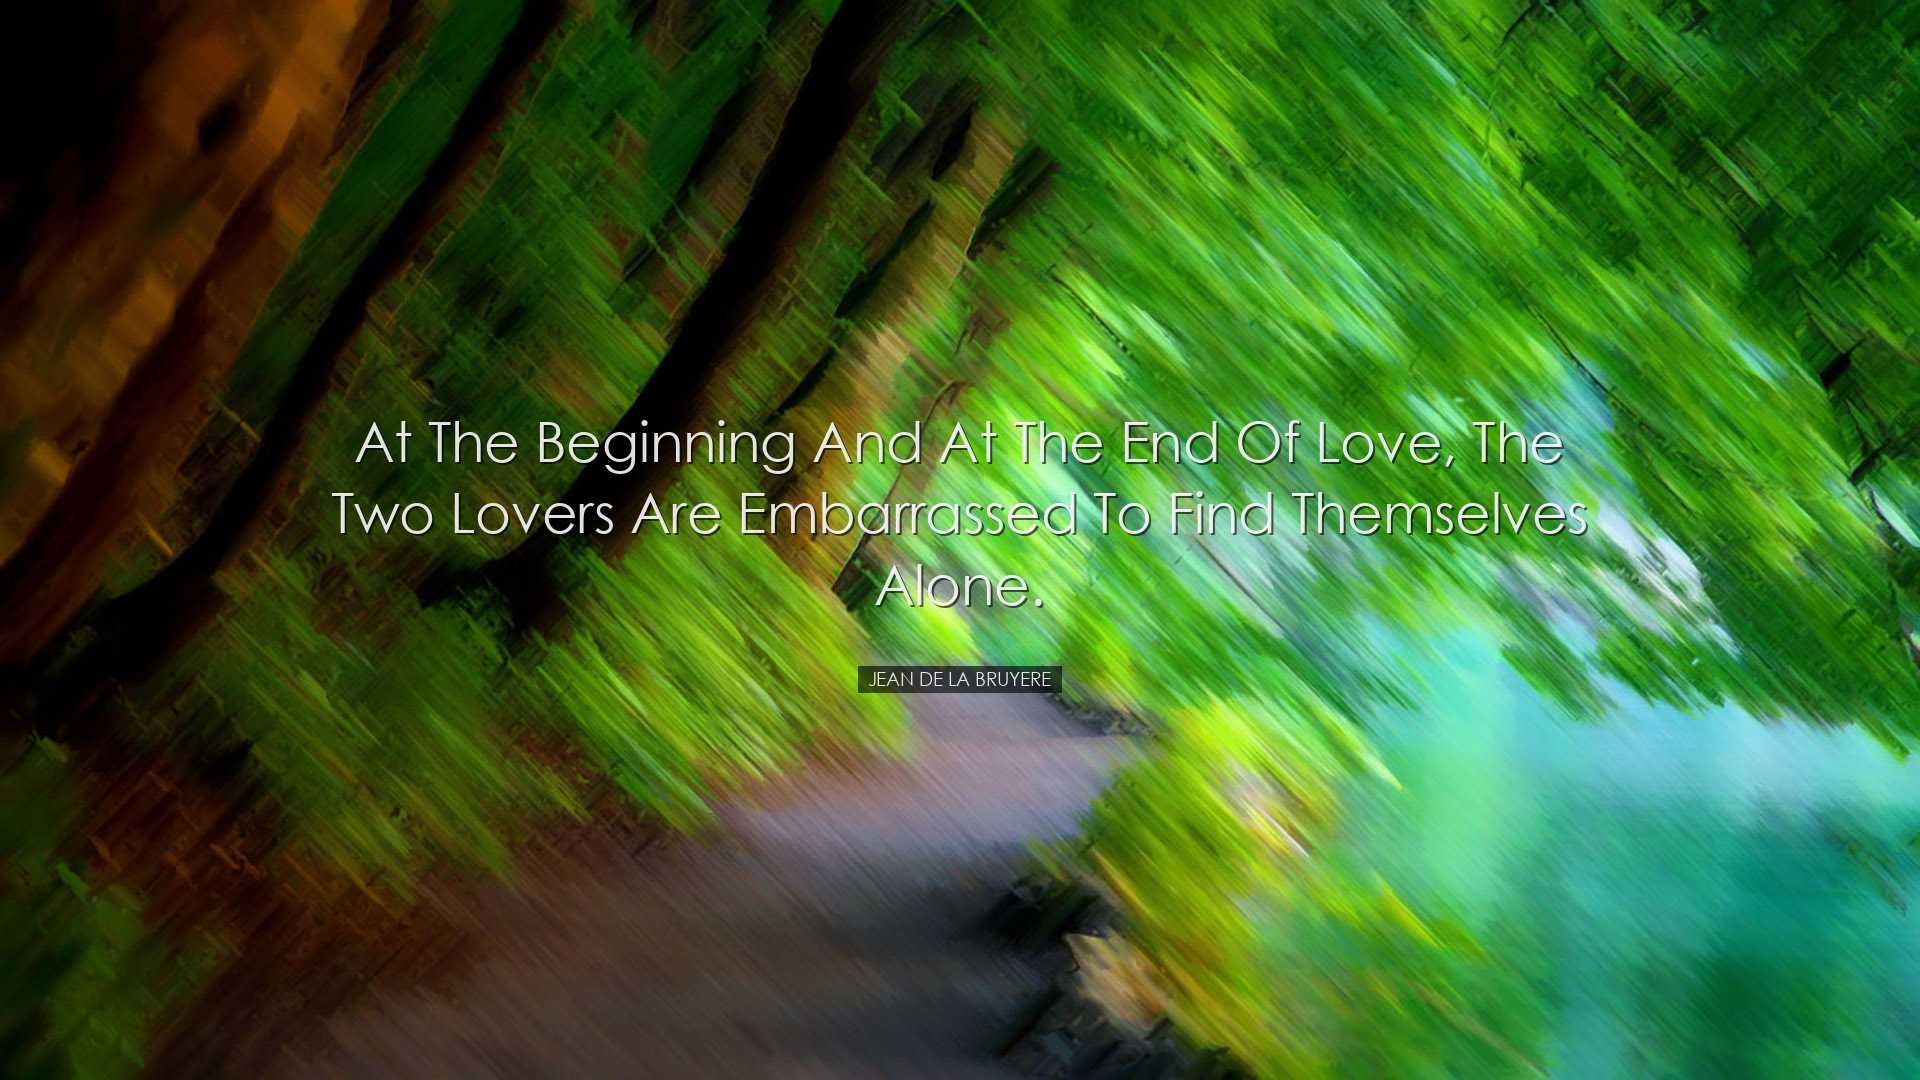 At the beginning and at the end of love, the two lovers are embarr